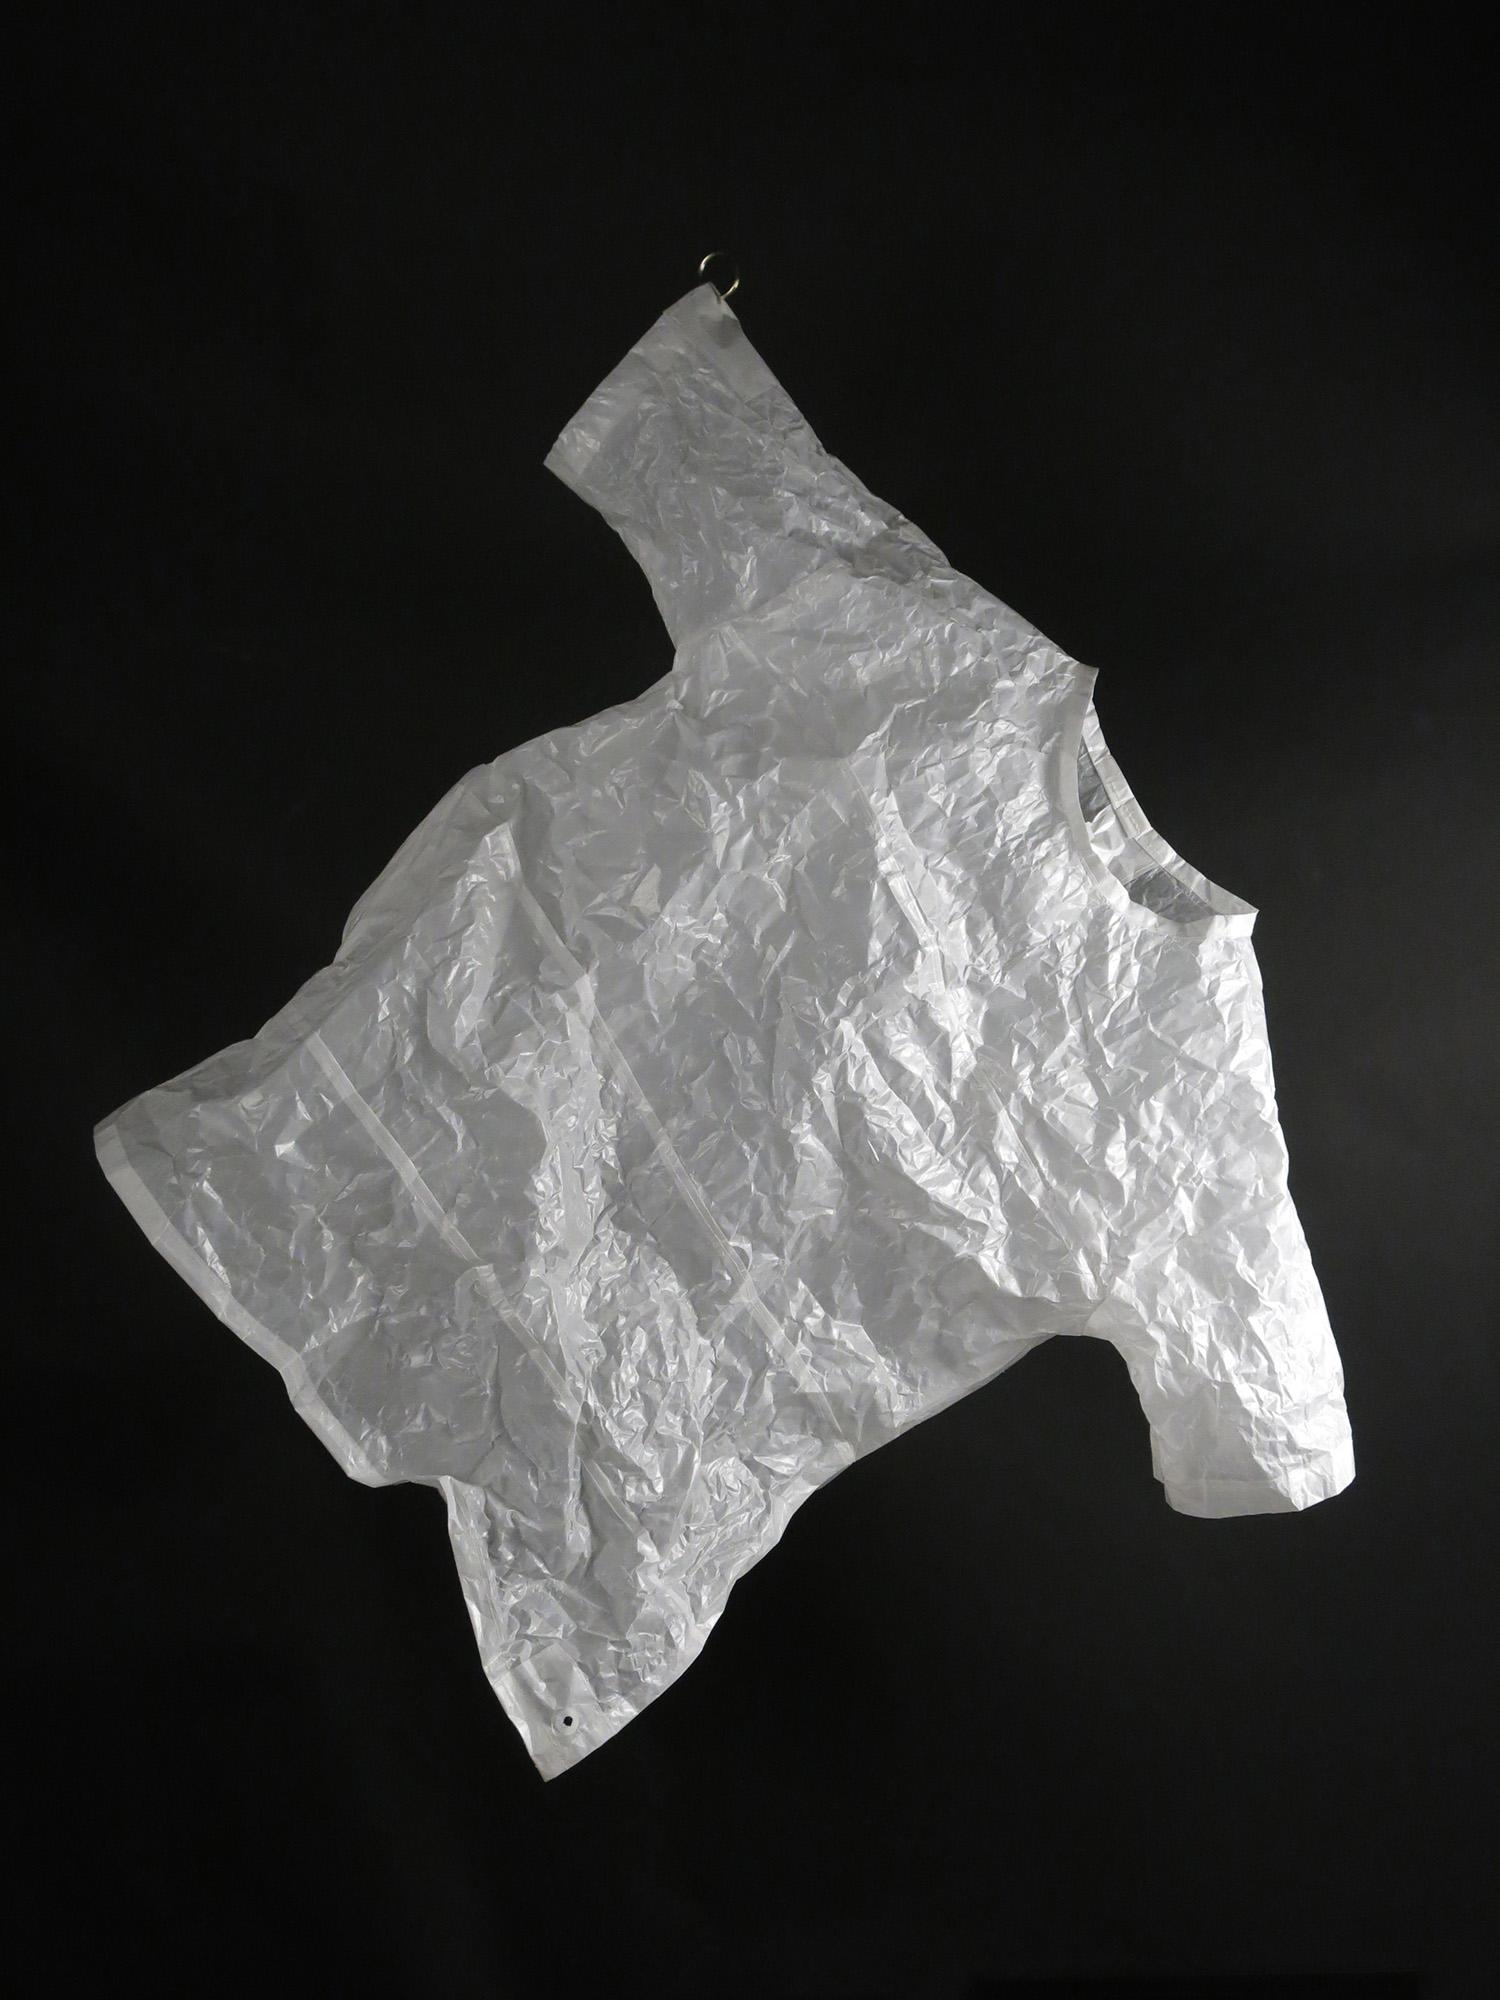 Tee-Shirt (Figurative White Glassine Paper Sculpture of Clothing)